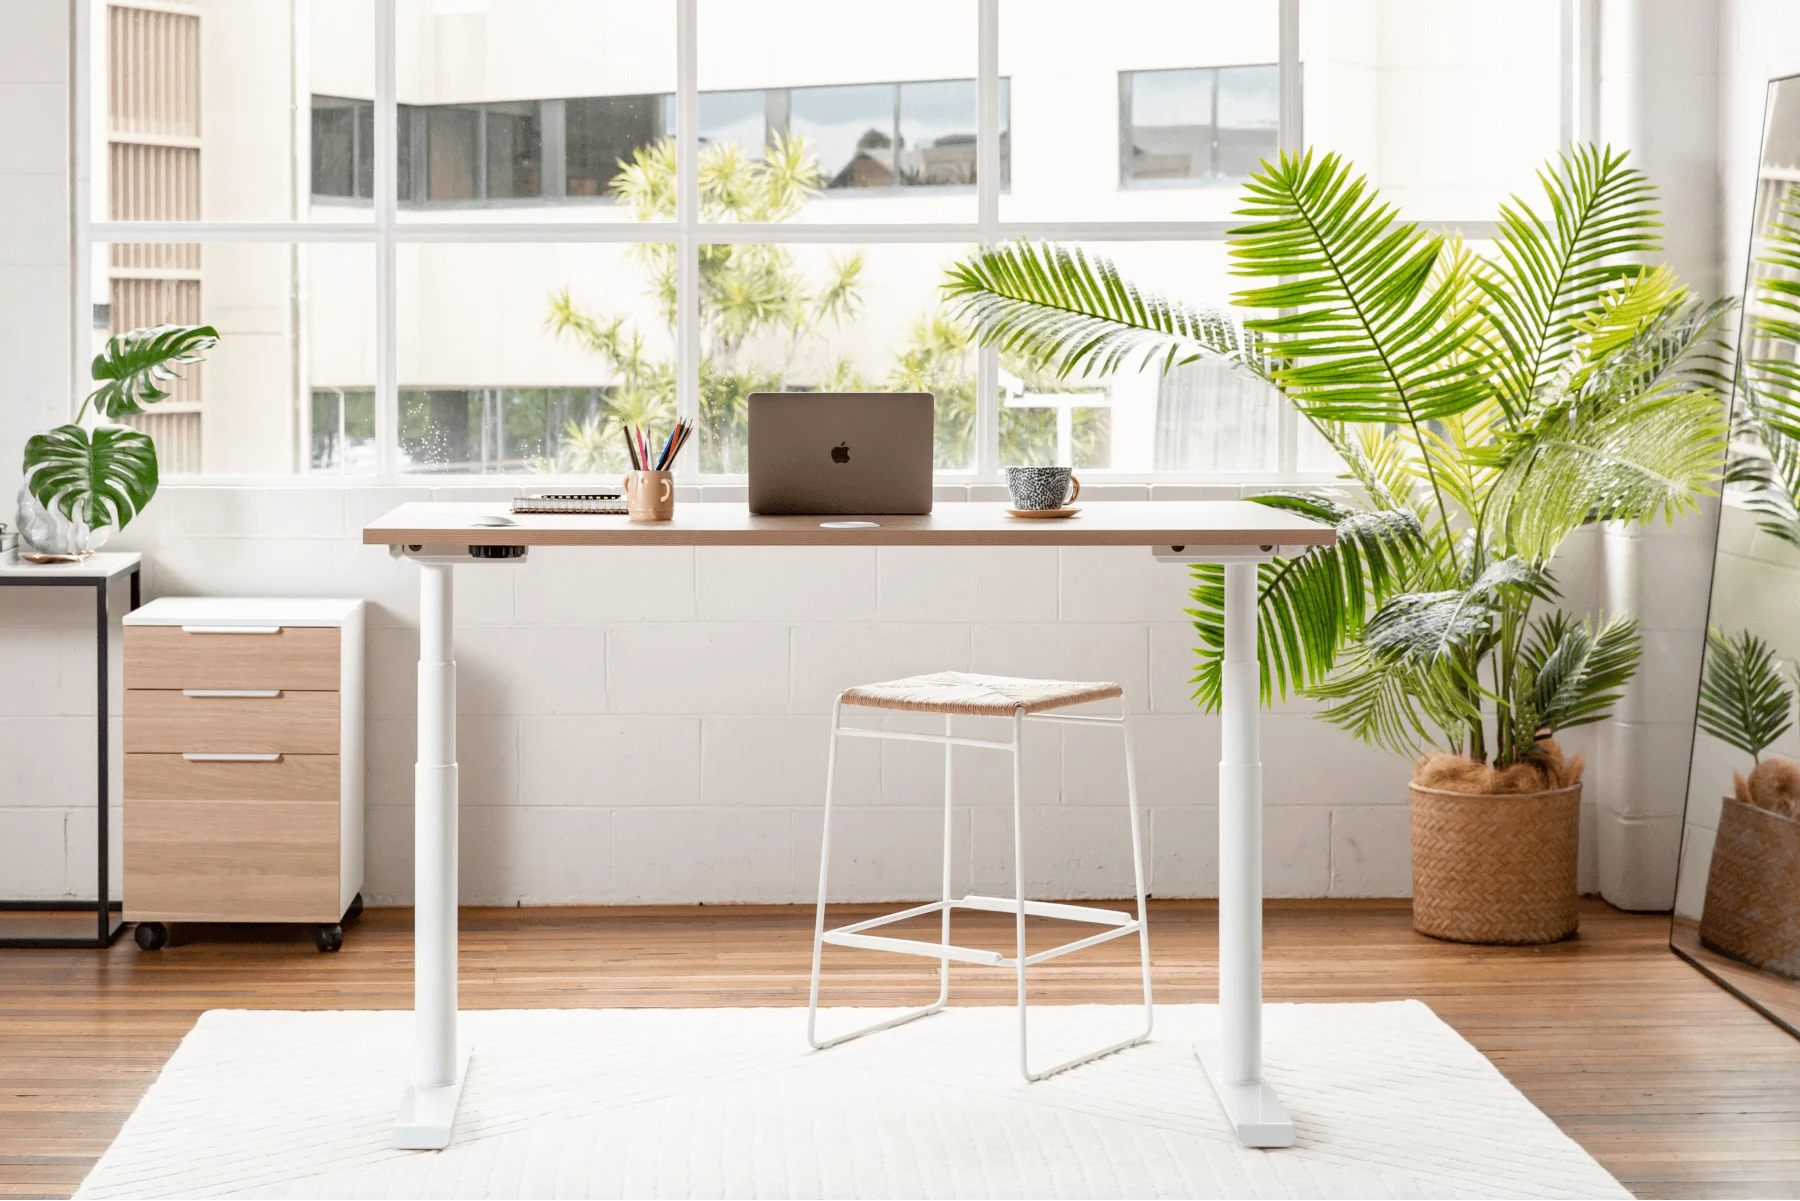 7 Tips to Creating a Holistic Workspace